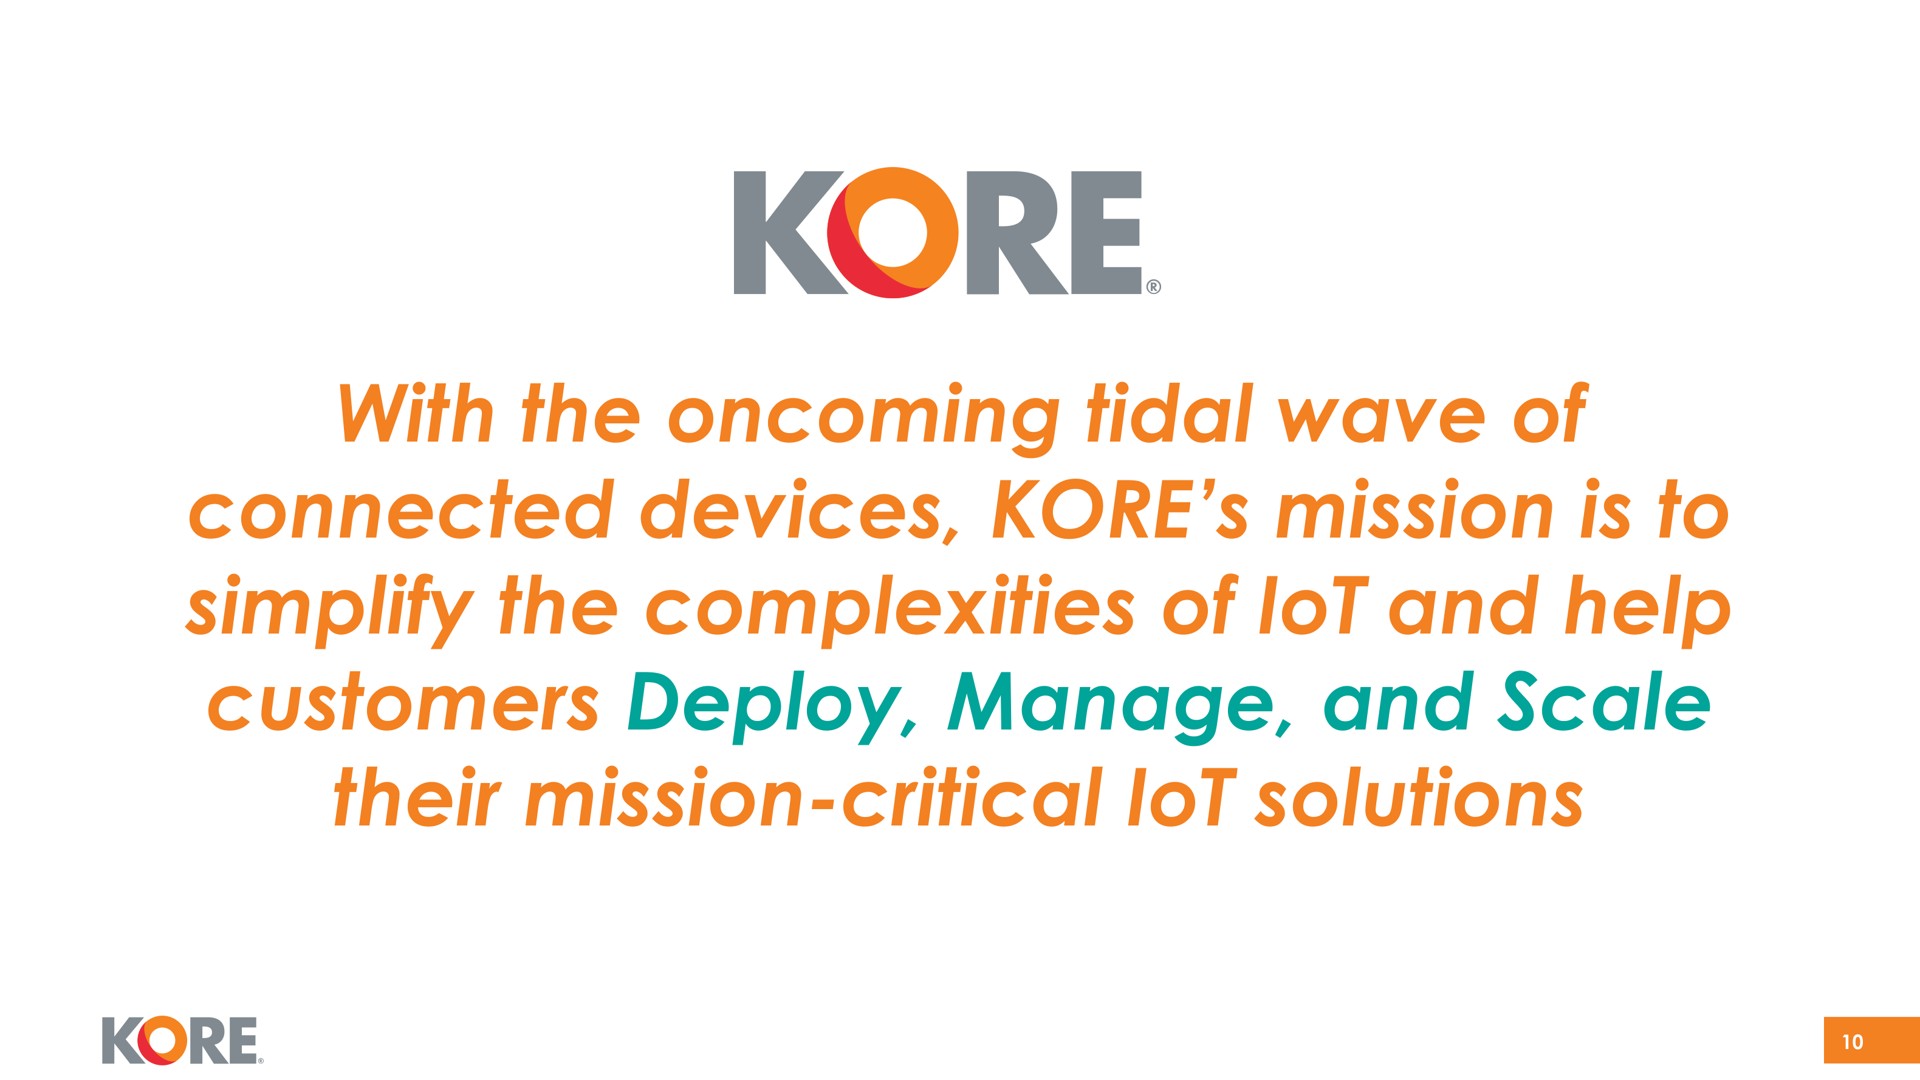 with the oncoming tidal wave of connected devices kore mission is to simplify the complexities of and help customers deploy manage and scale their mission critical solutions lot lot | Kore